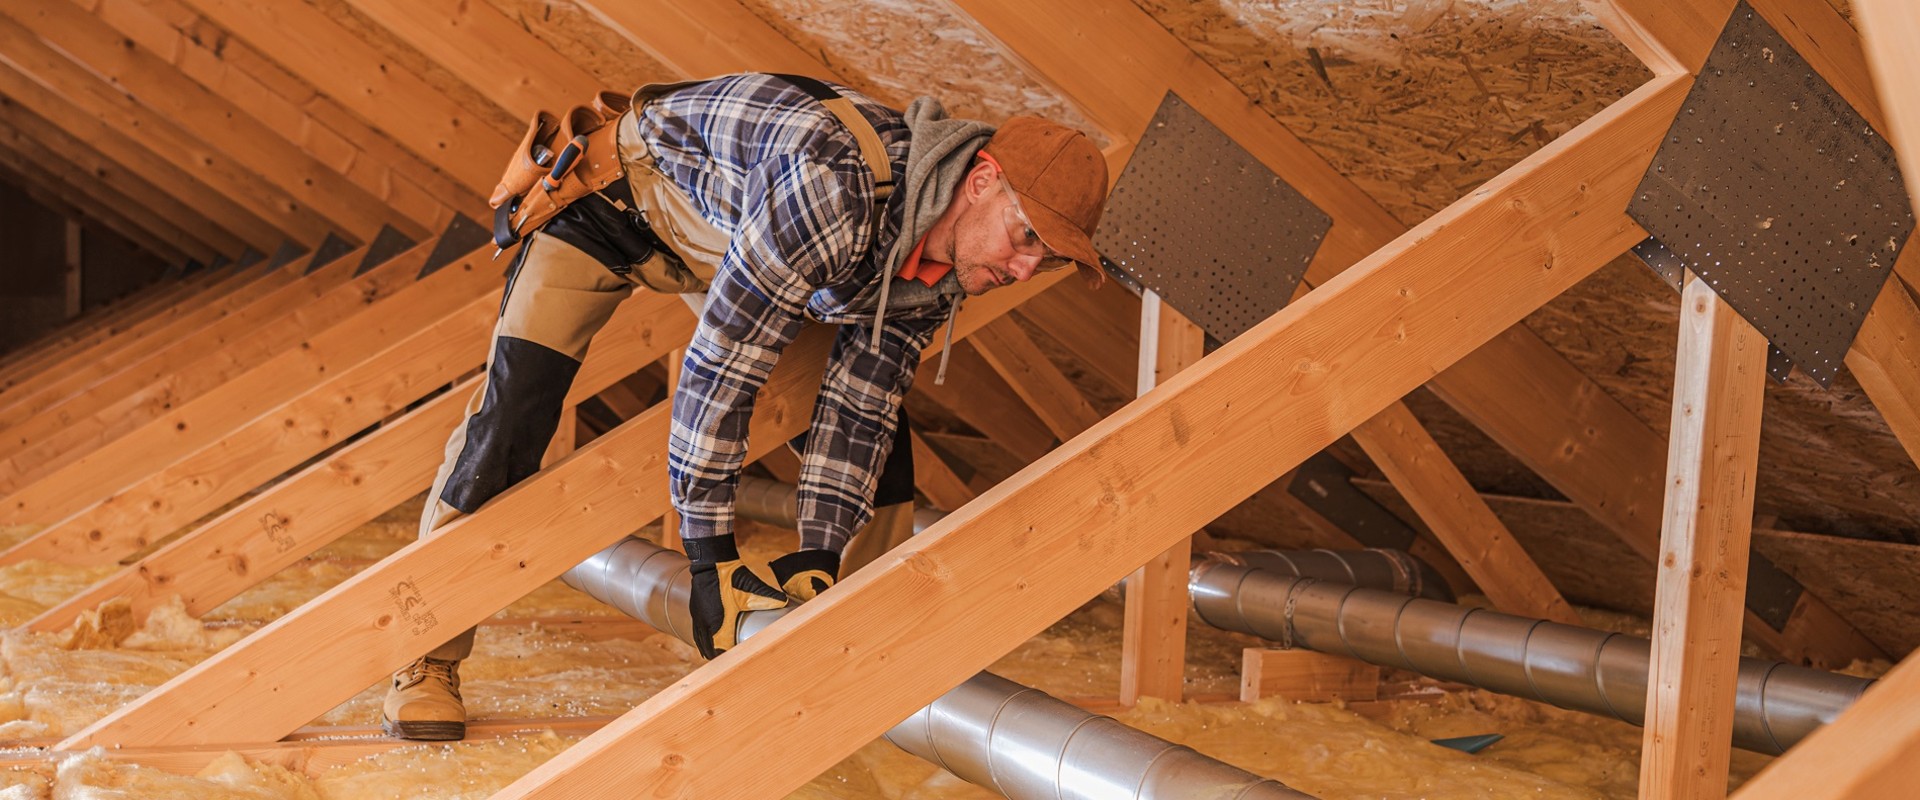 Insulating Your Air Ducts: What You Need to Know